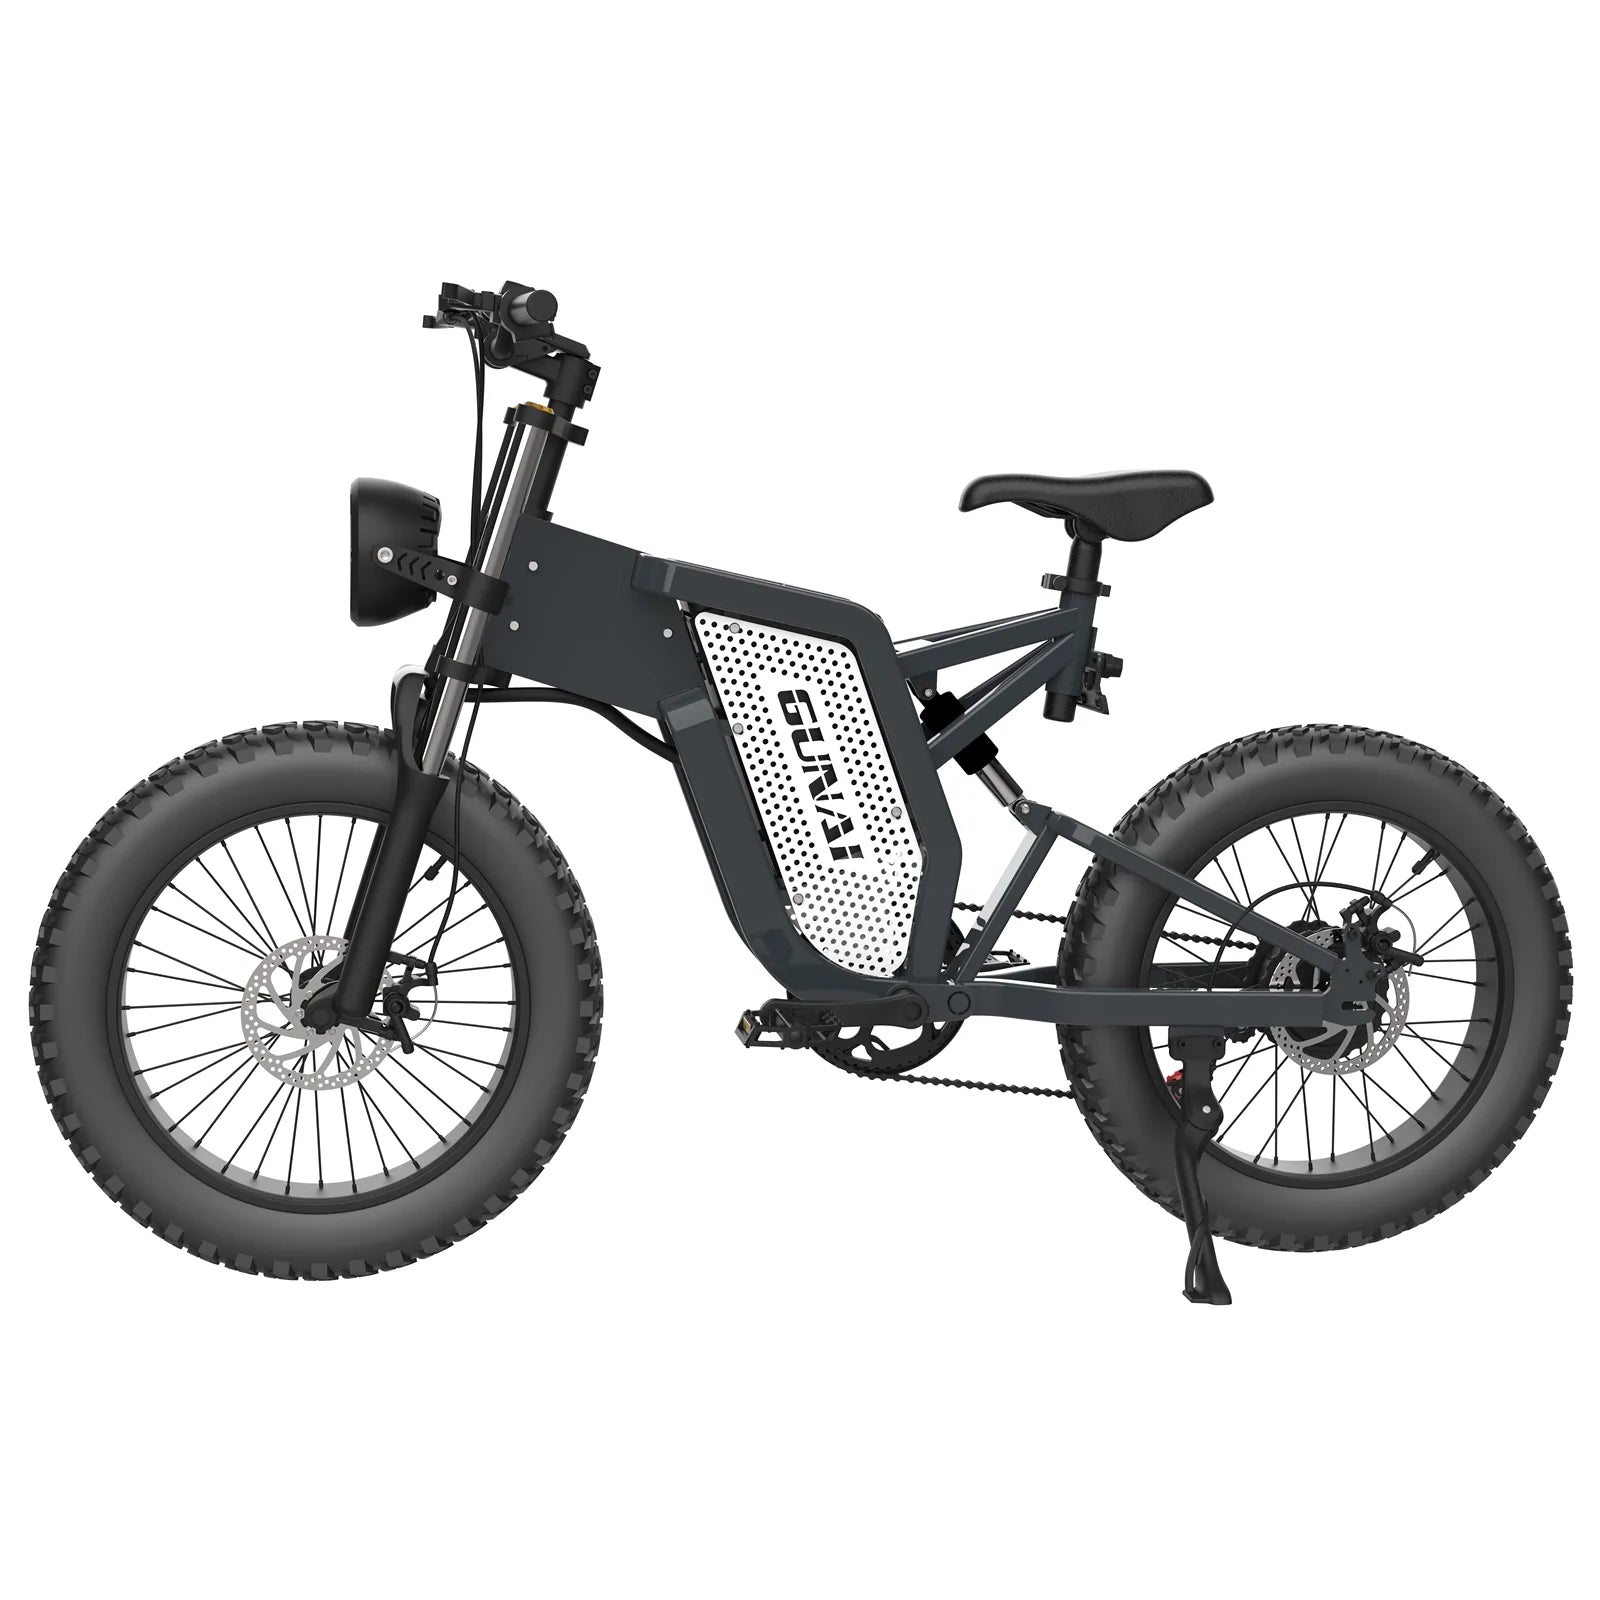 GUNAI MX25 Electric Bicycle Preorder expected in November - Pogo cycles UK -cycle to work scheme available